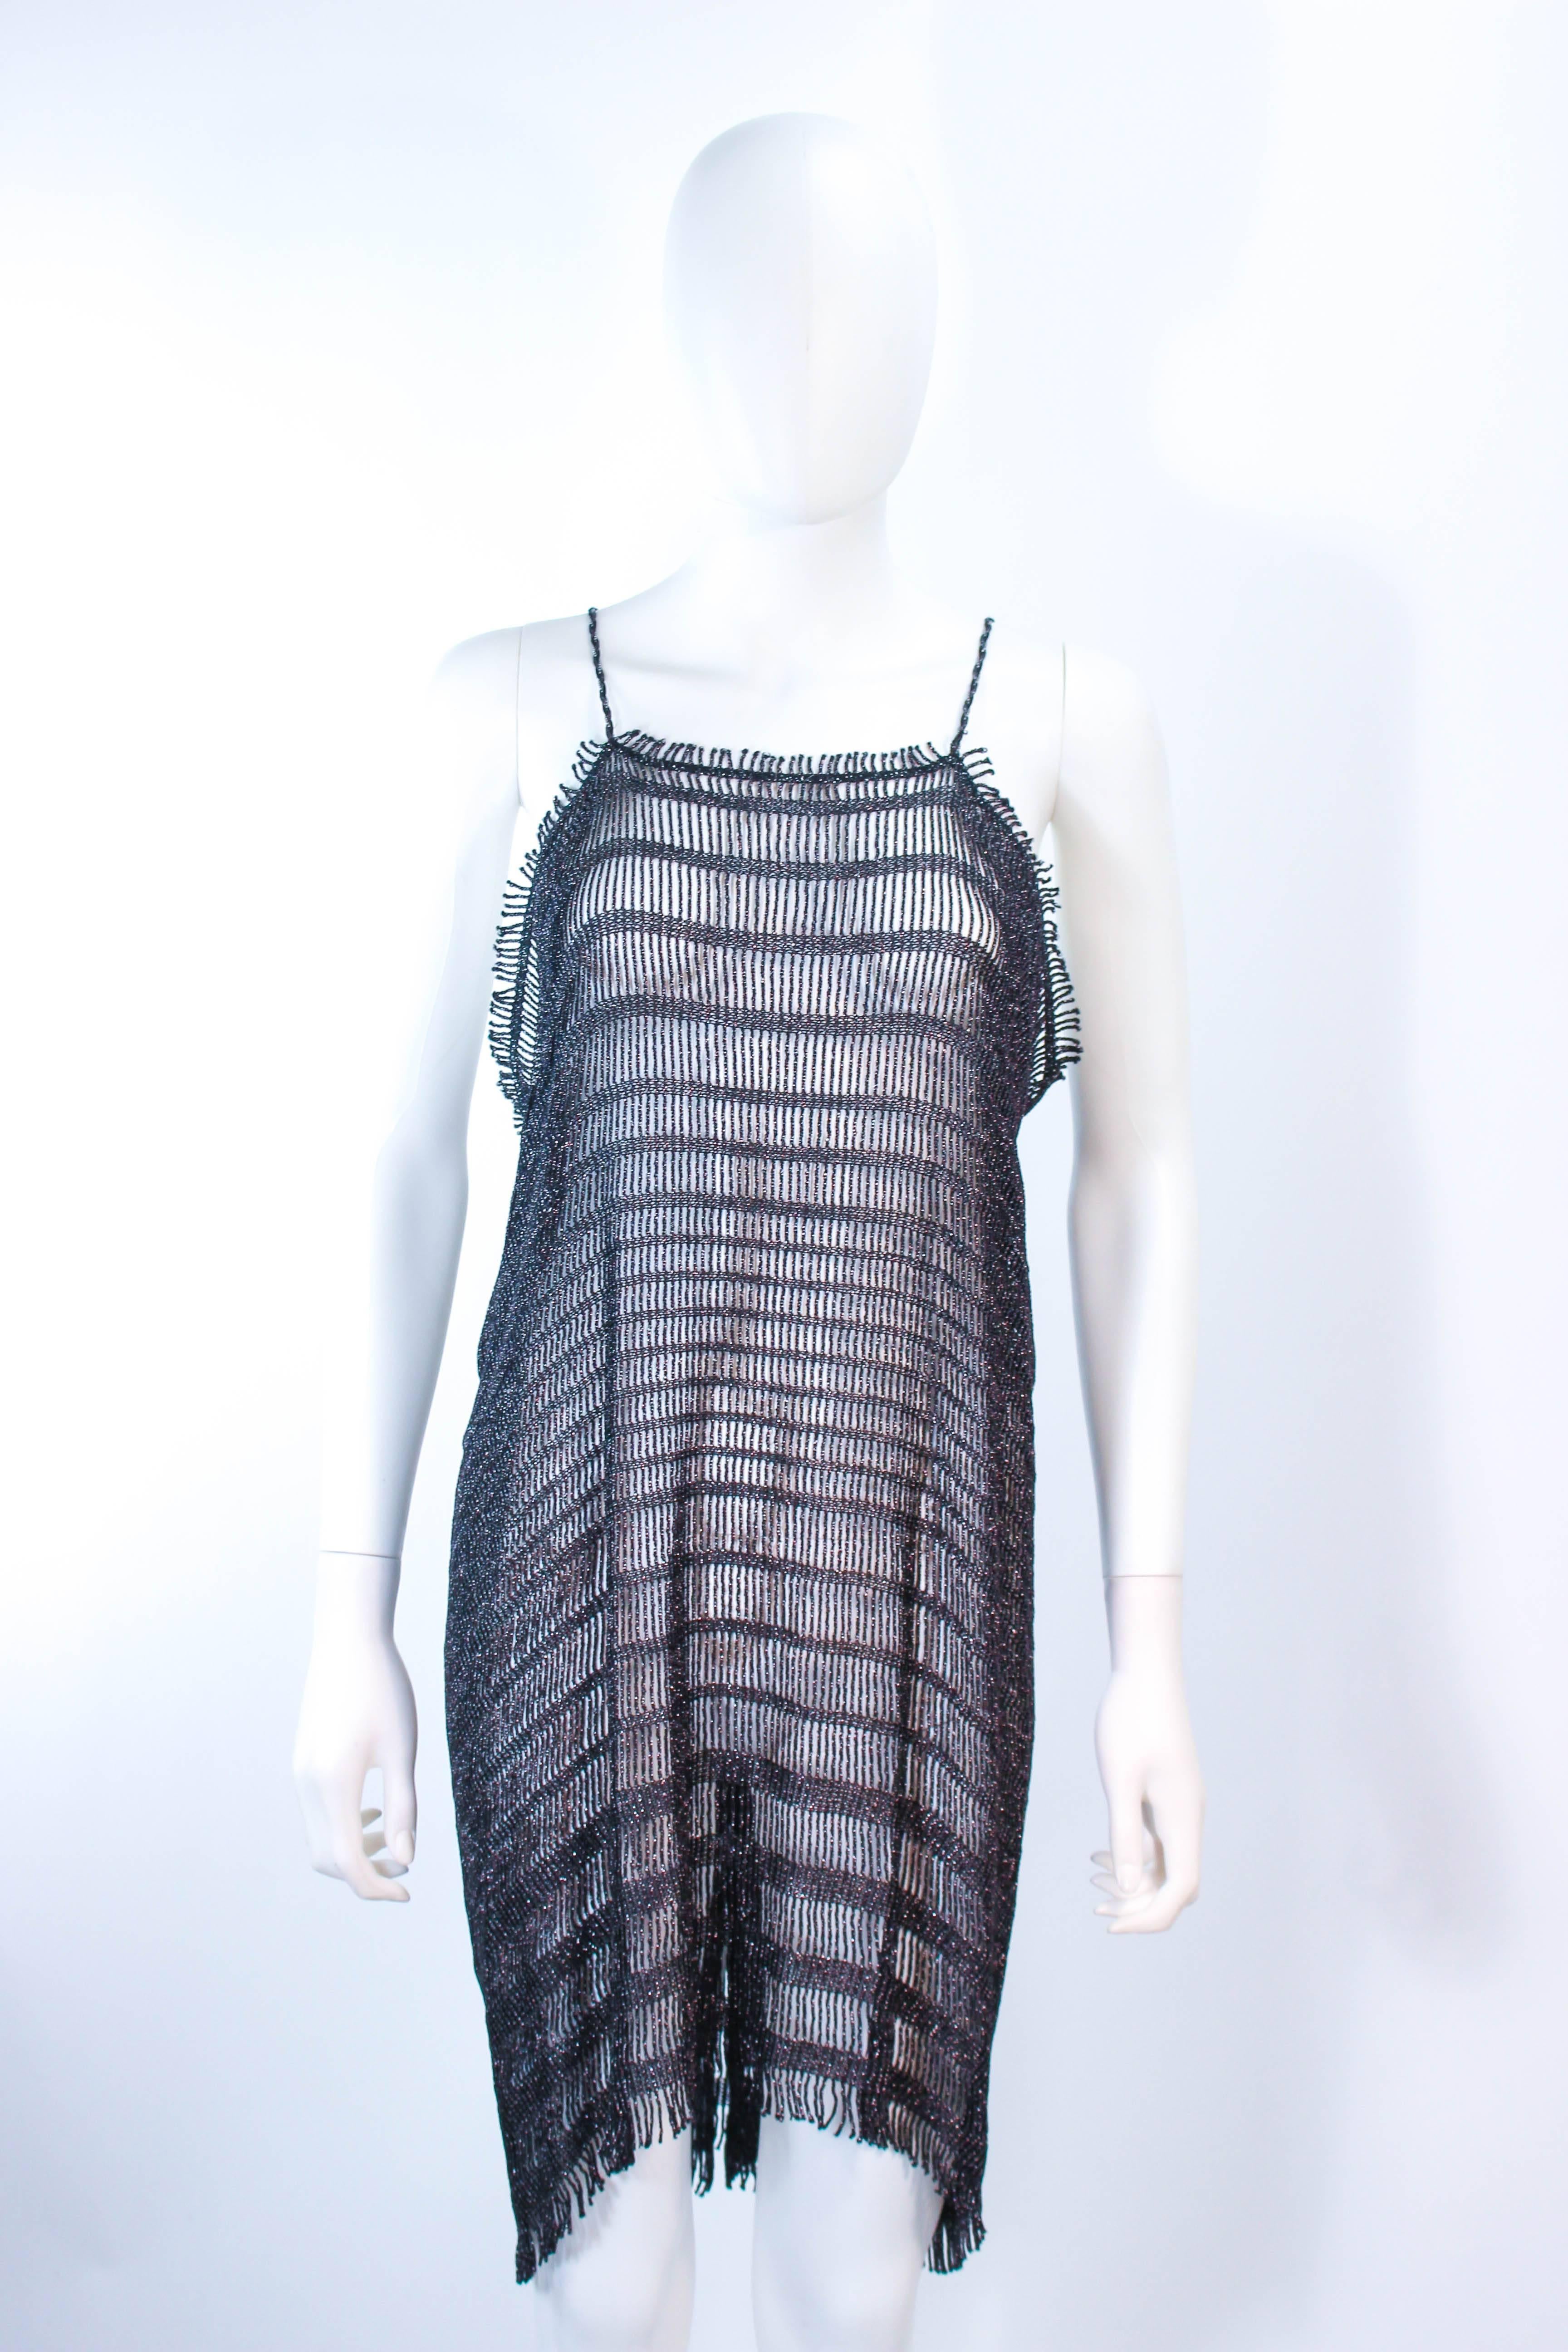 MISSONI Black Metallic Knit Stretch Set with Nude Jersey Dress Size 44 For Sale 4